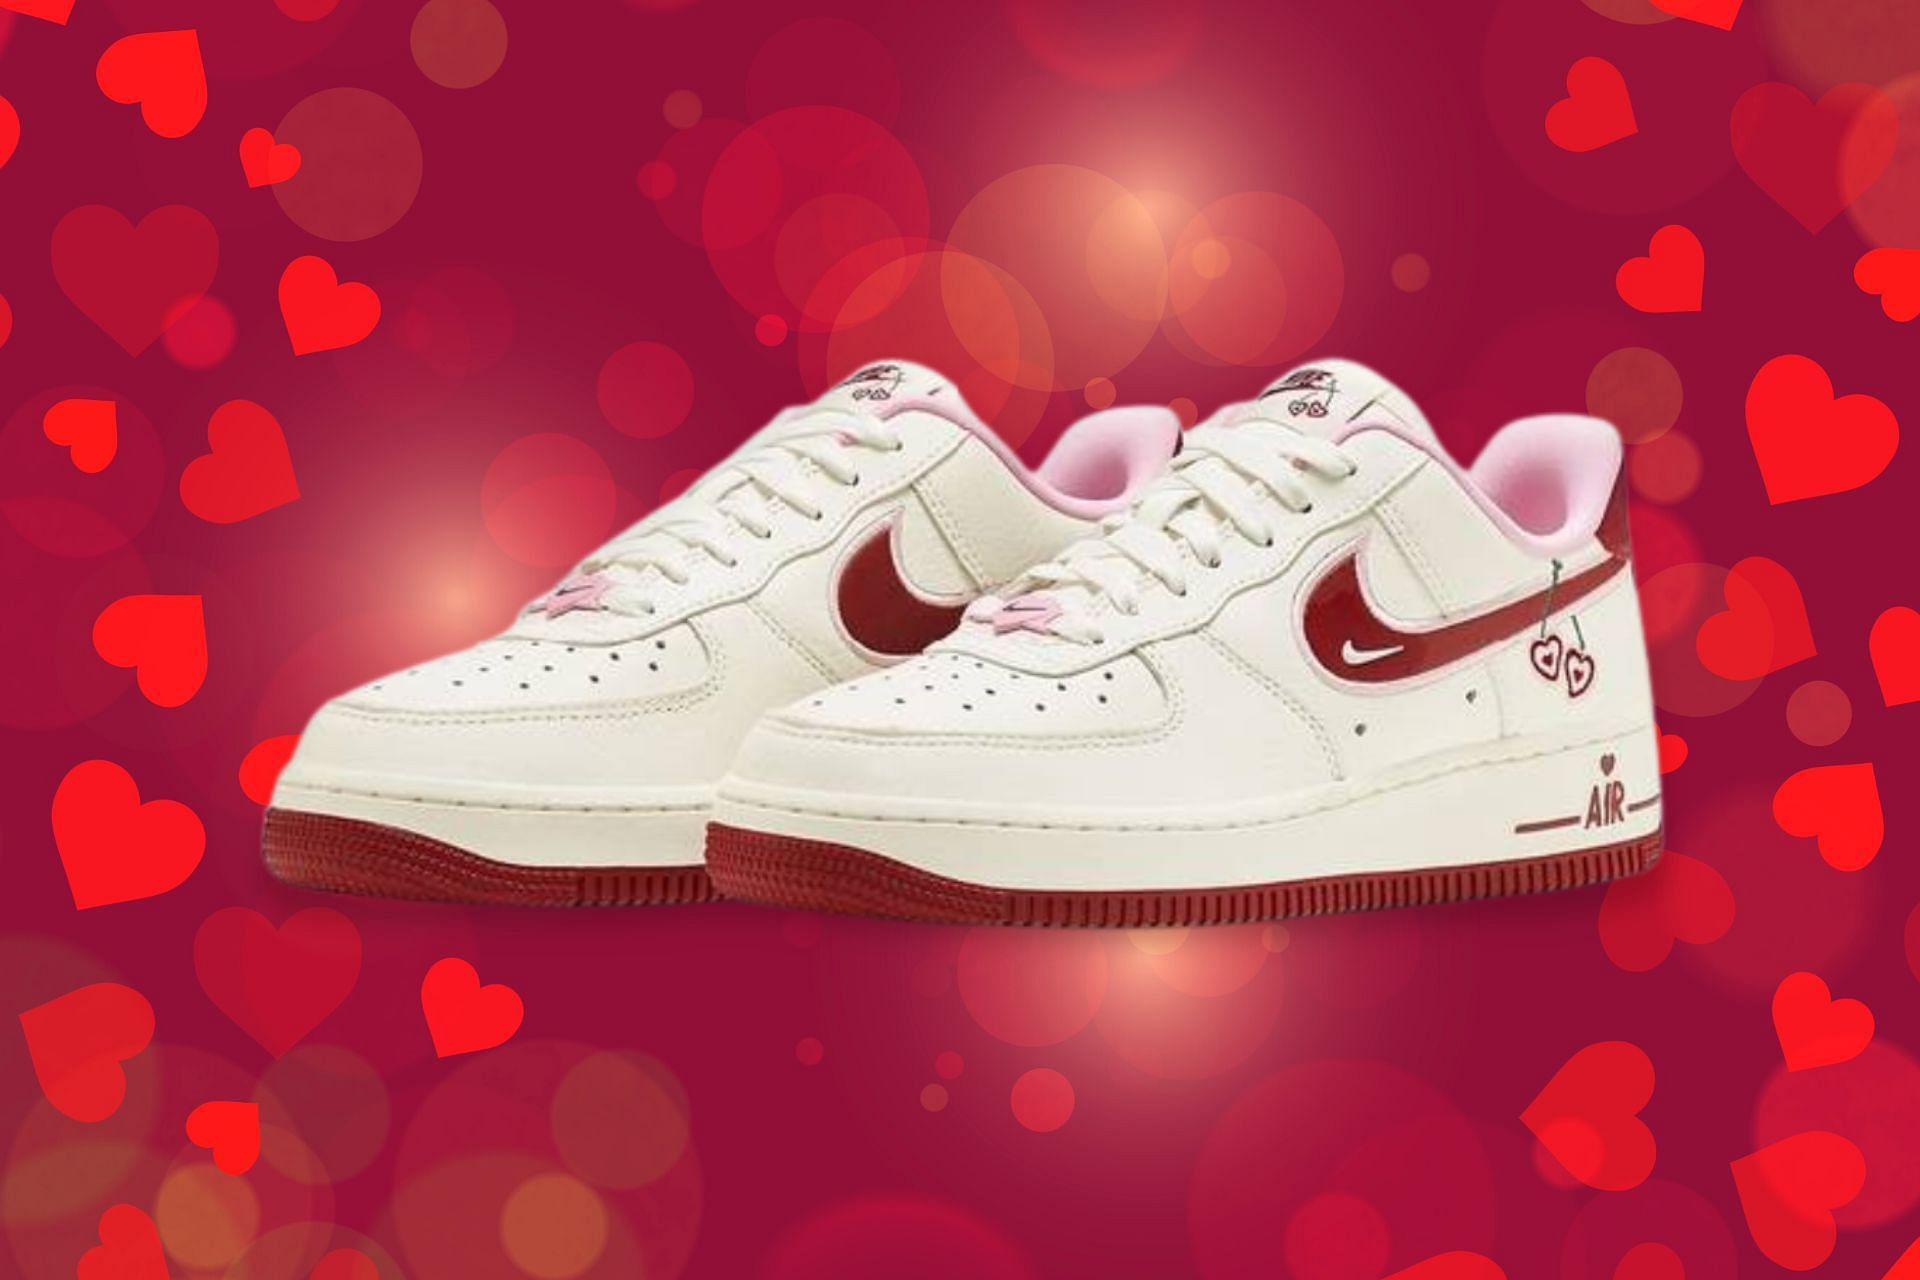 Air Force 1: Nike Air Force 1 "Valentine's Day" shoes: buy, and more details explored